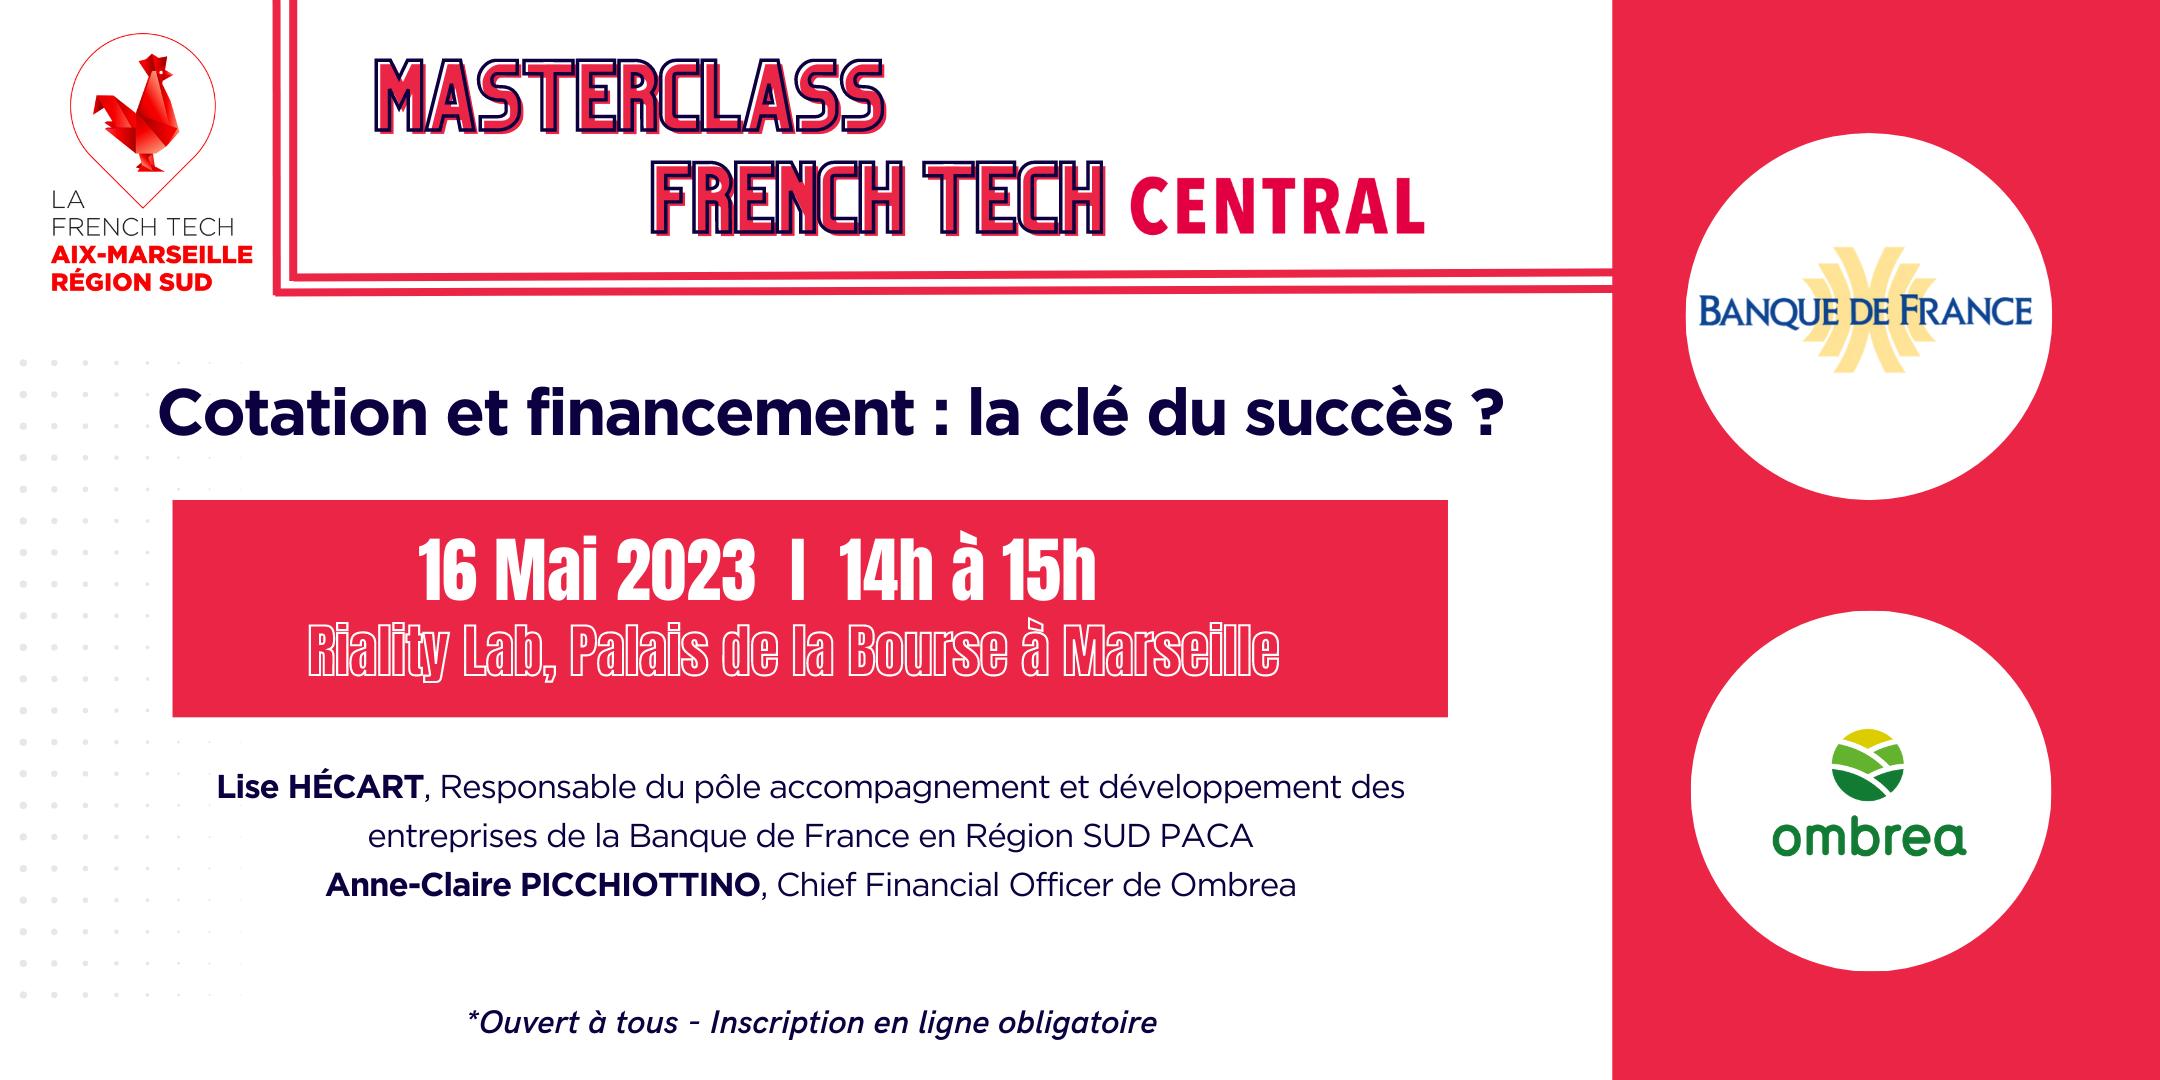 Masterclass French Tech Central